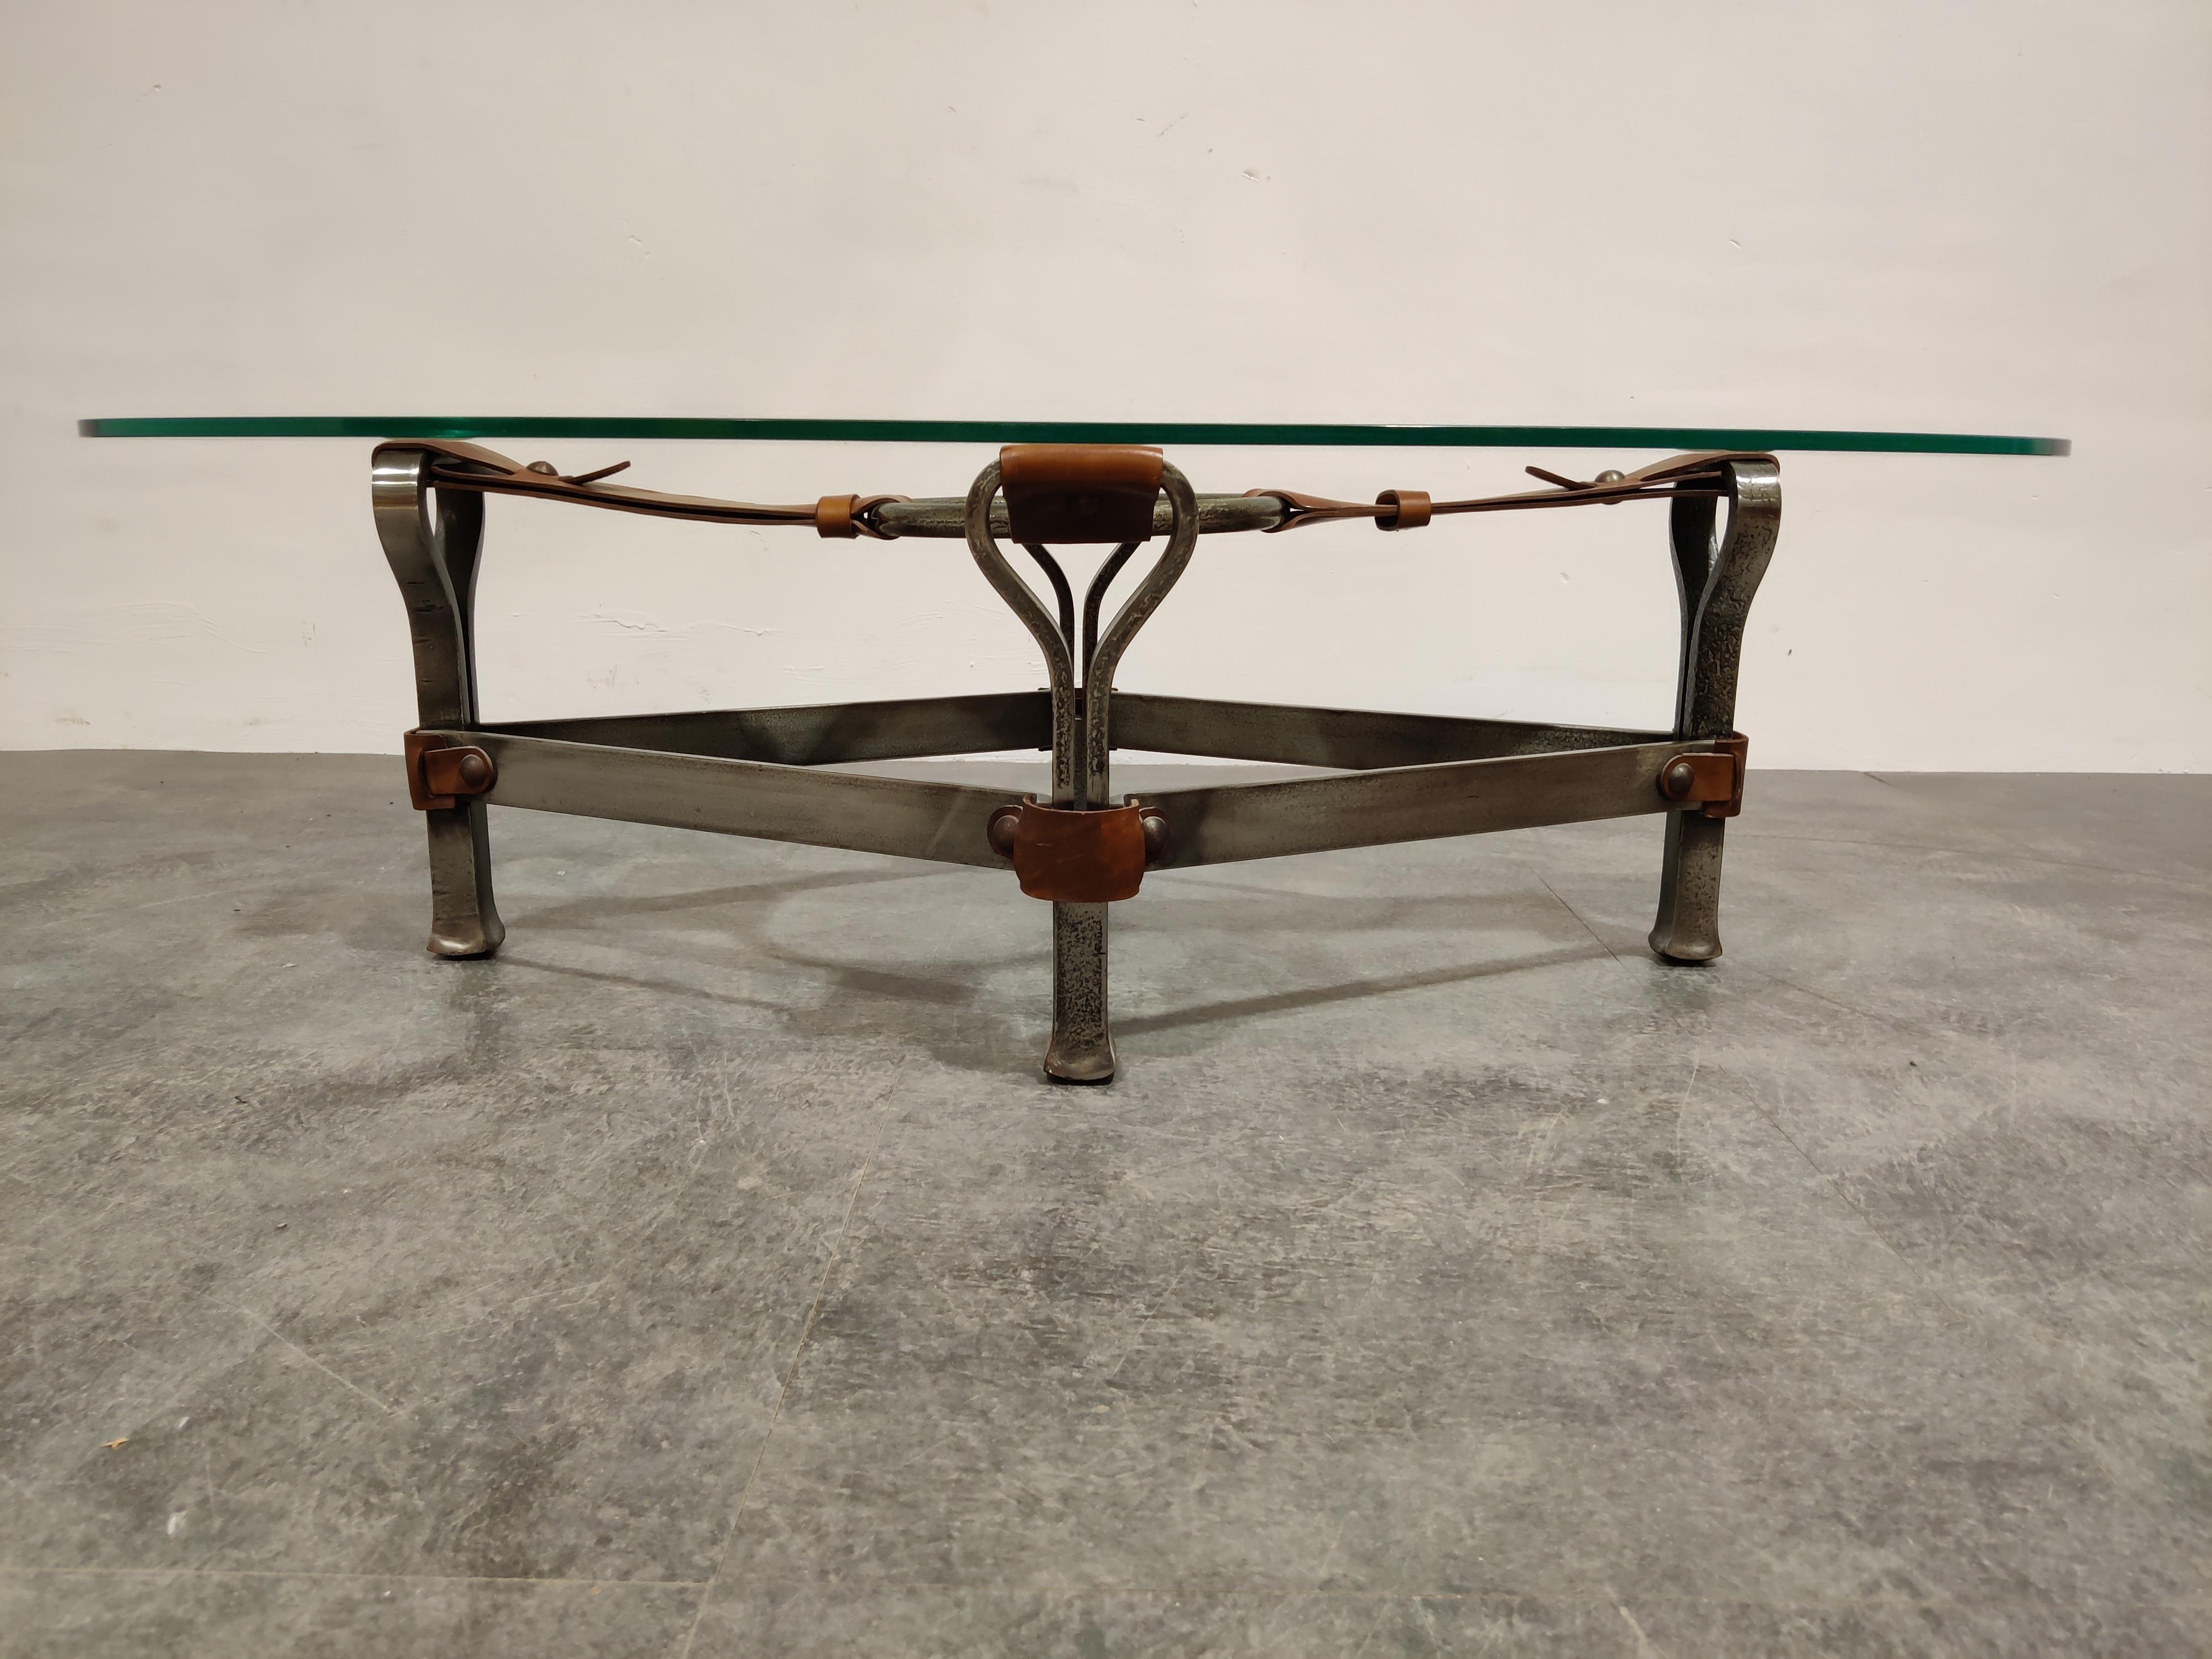 Beautiful coffee table made from iron and leather with an oval clear glass top. 

Great design, which can fit in in the popular brutalist design style nowadays.

1960s - France

Good condition

Dimensions:
Height 34cm/13.38